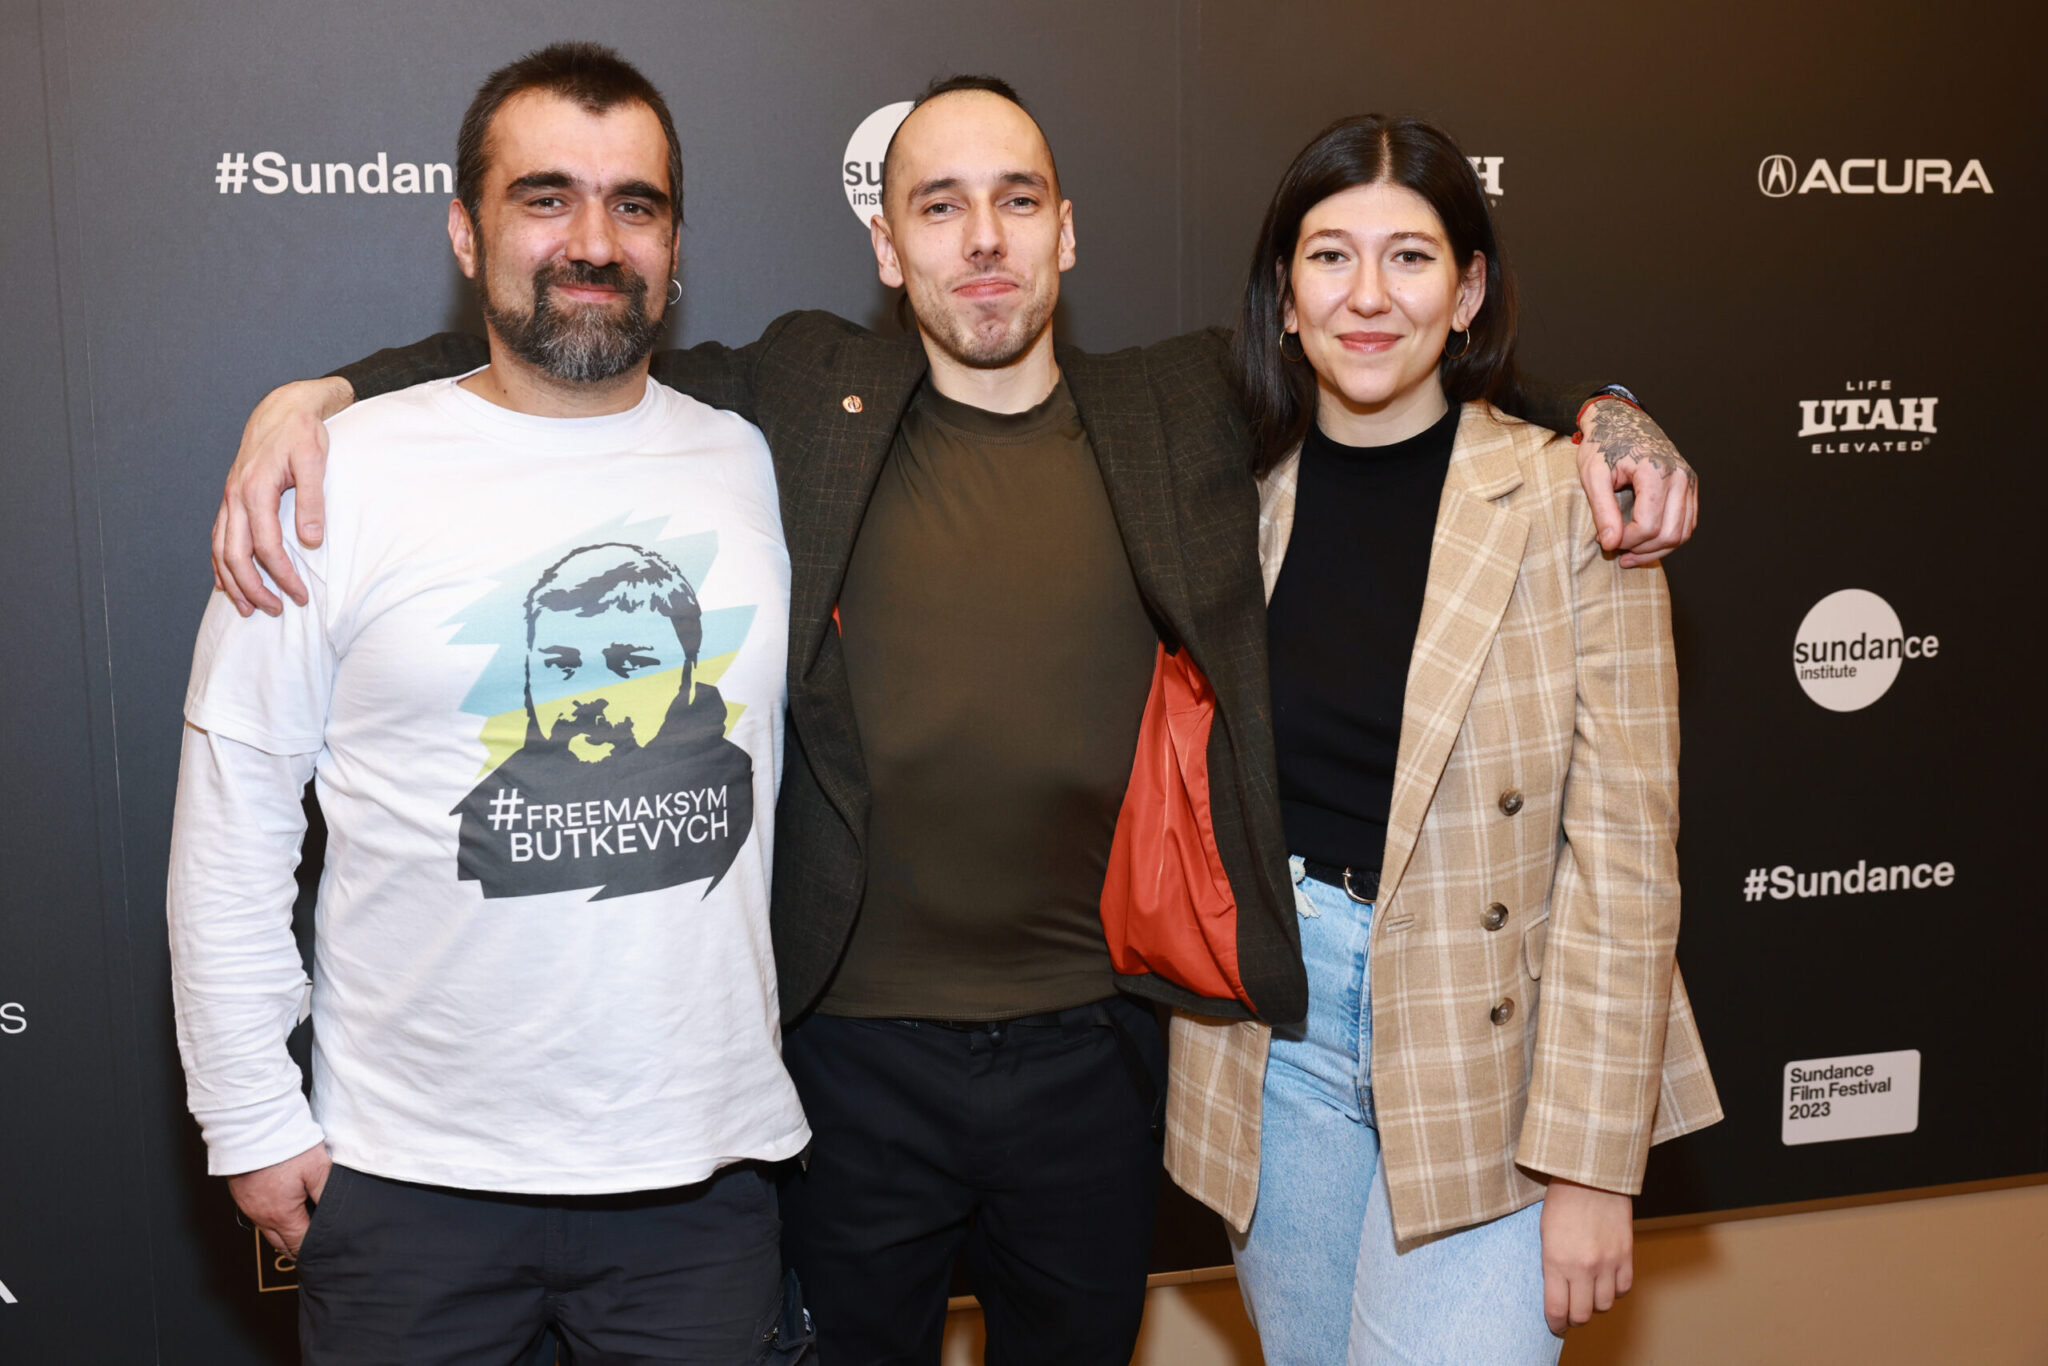 A man with a dark brown hair and beard in a white long-sleeved shirt, a man in a brown blazer with his arms around both the beard man and a woman in a tan blazer with short black hair, in front of a step and repeat at the 2023 Sundance Film Festival.